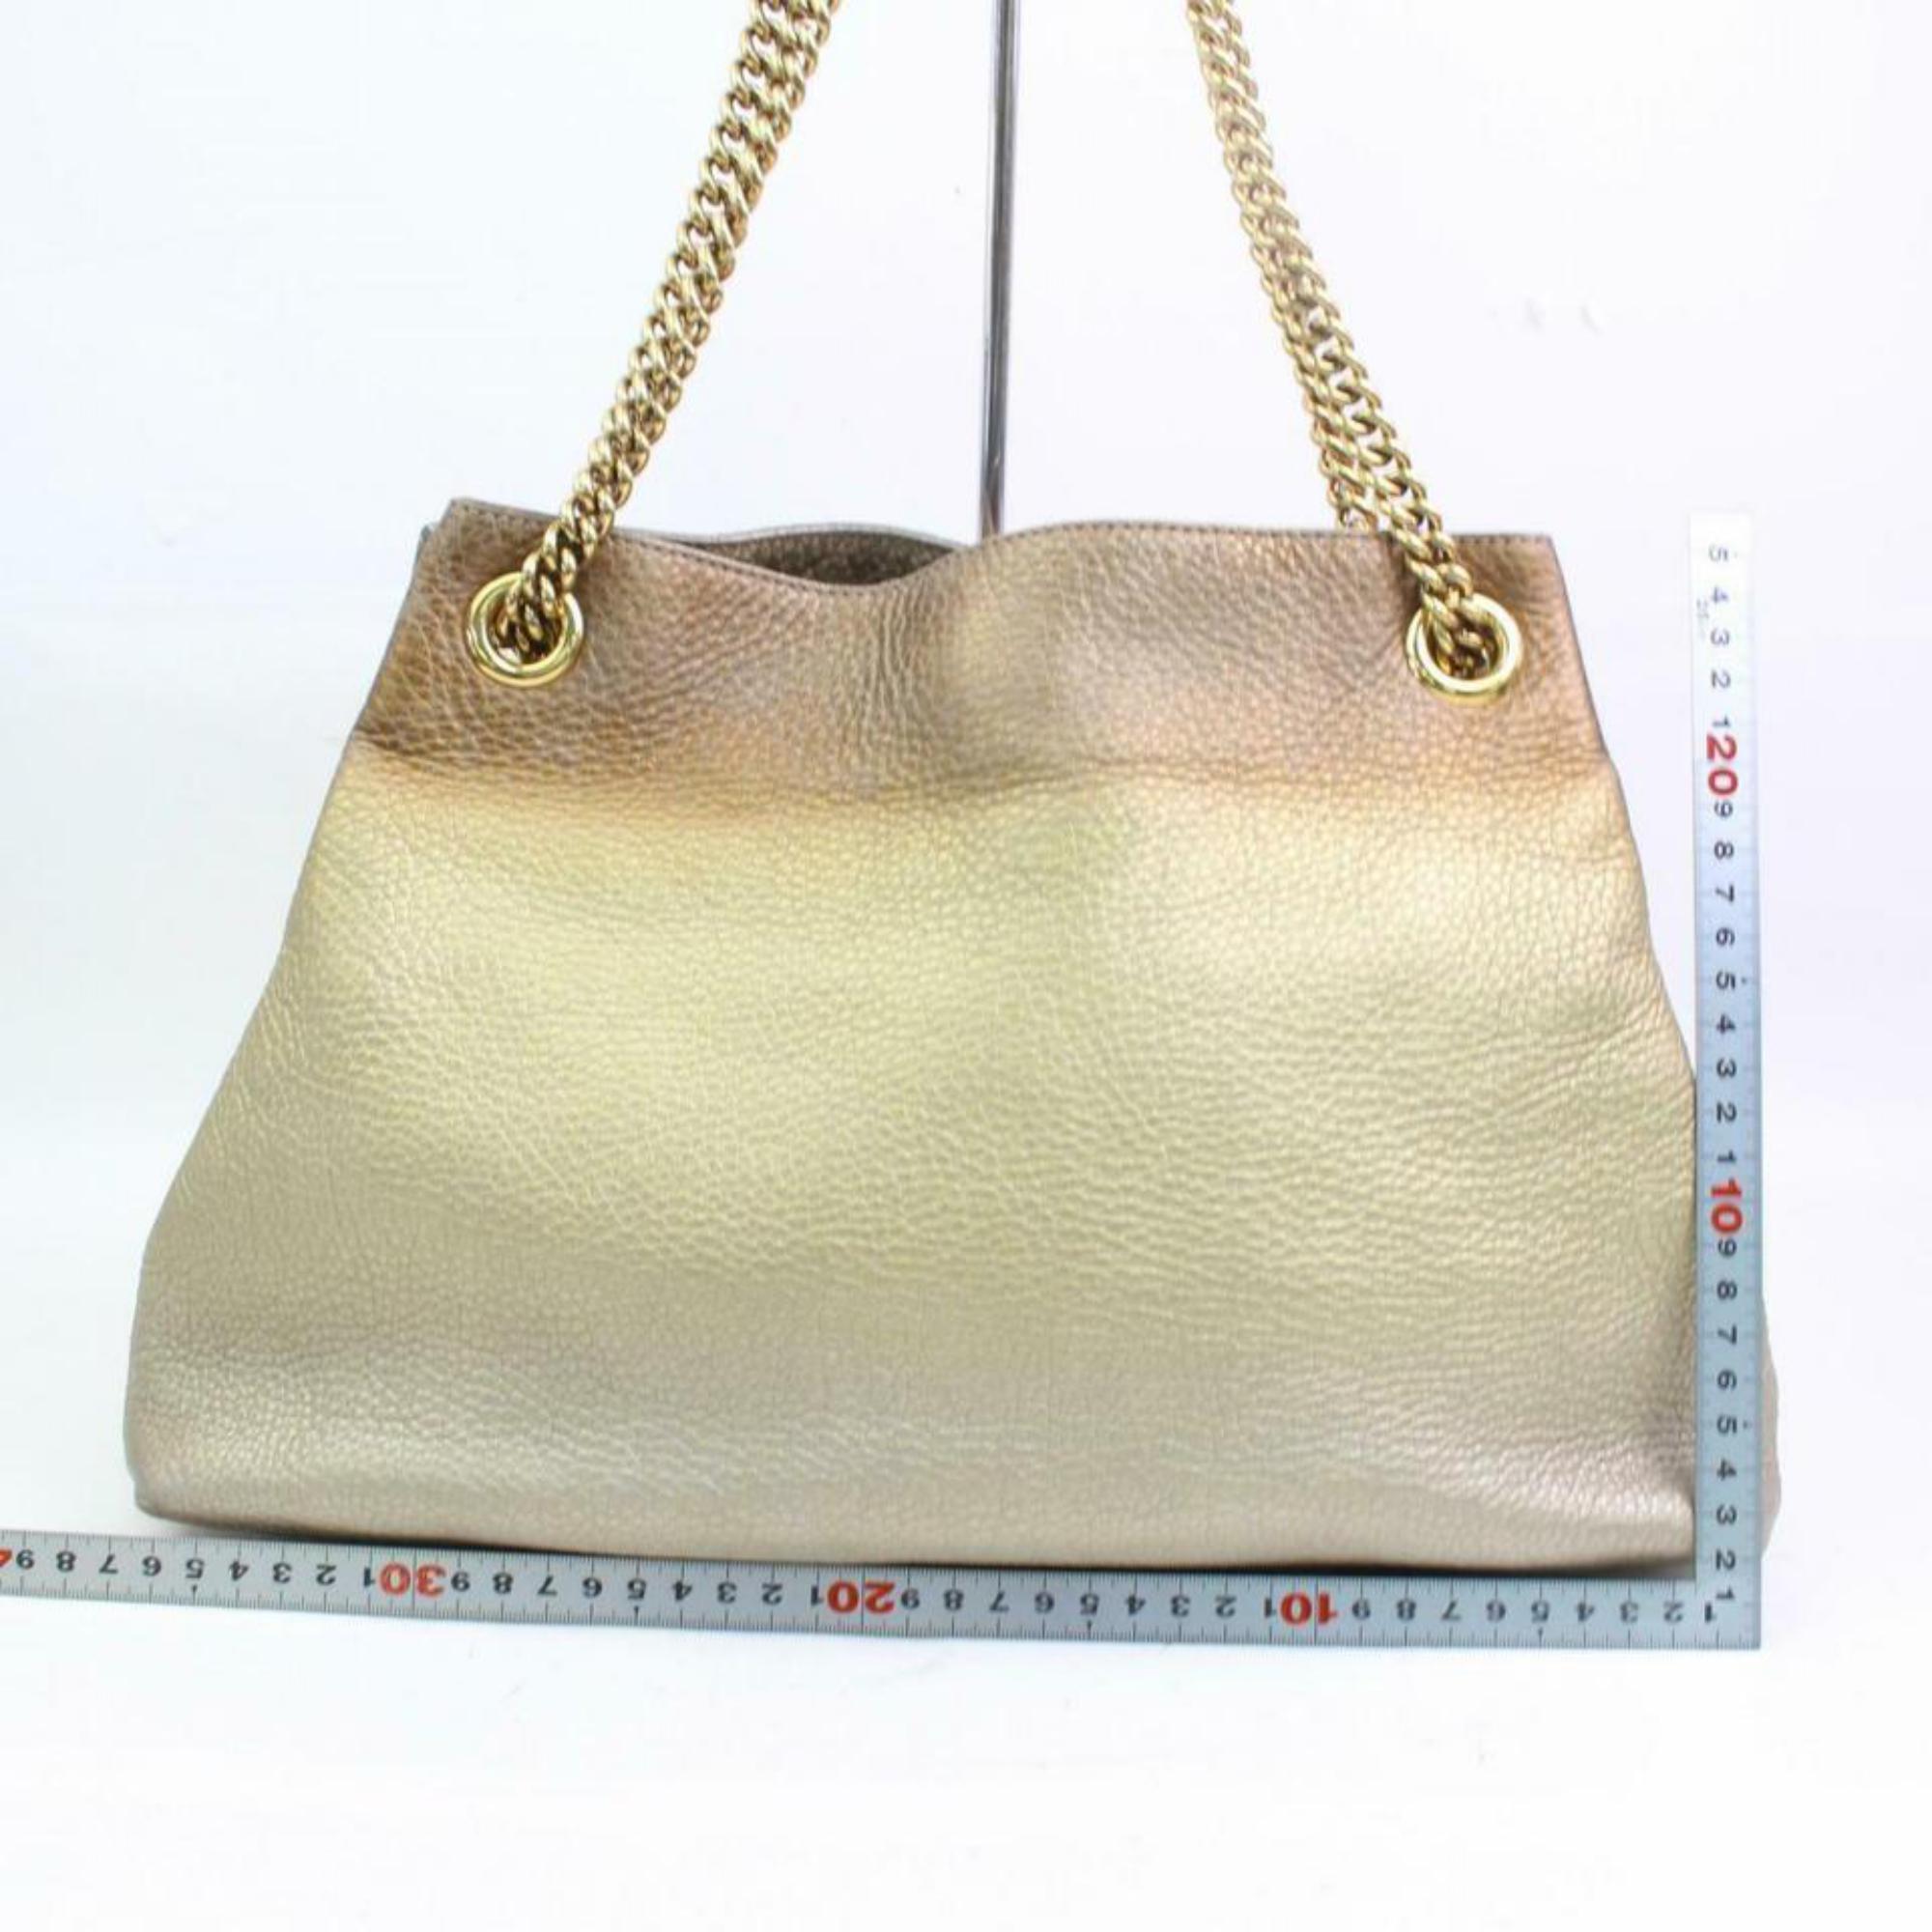 Gucci Ombre Soho Tassel Gold Chain Tote 870595 Beaige Leather Shoulder Bag For Sale 1